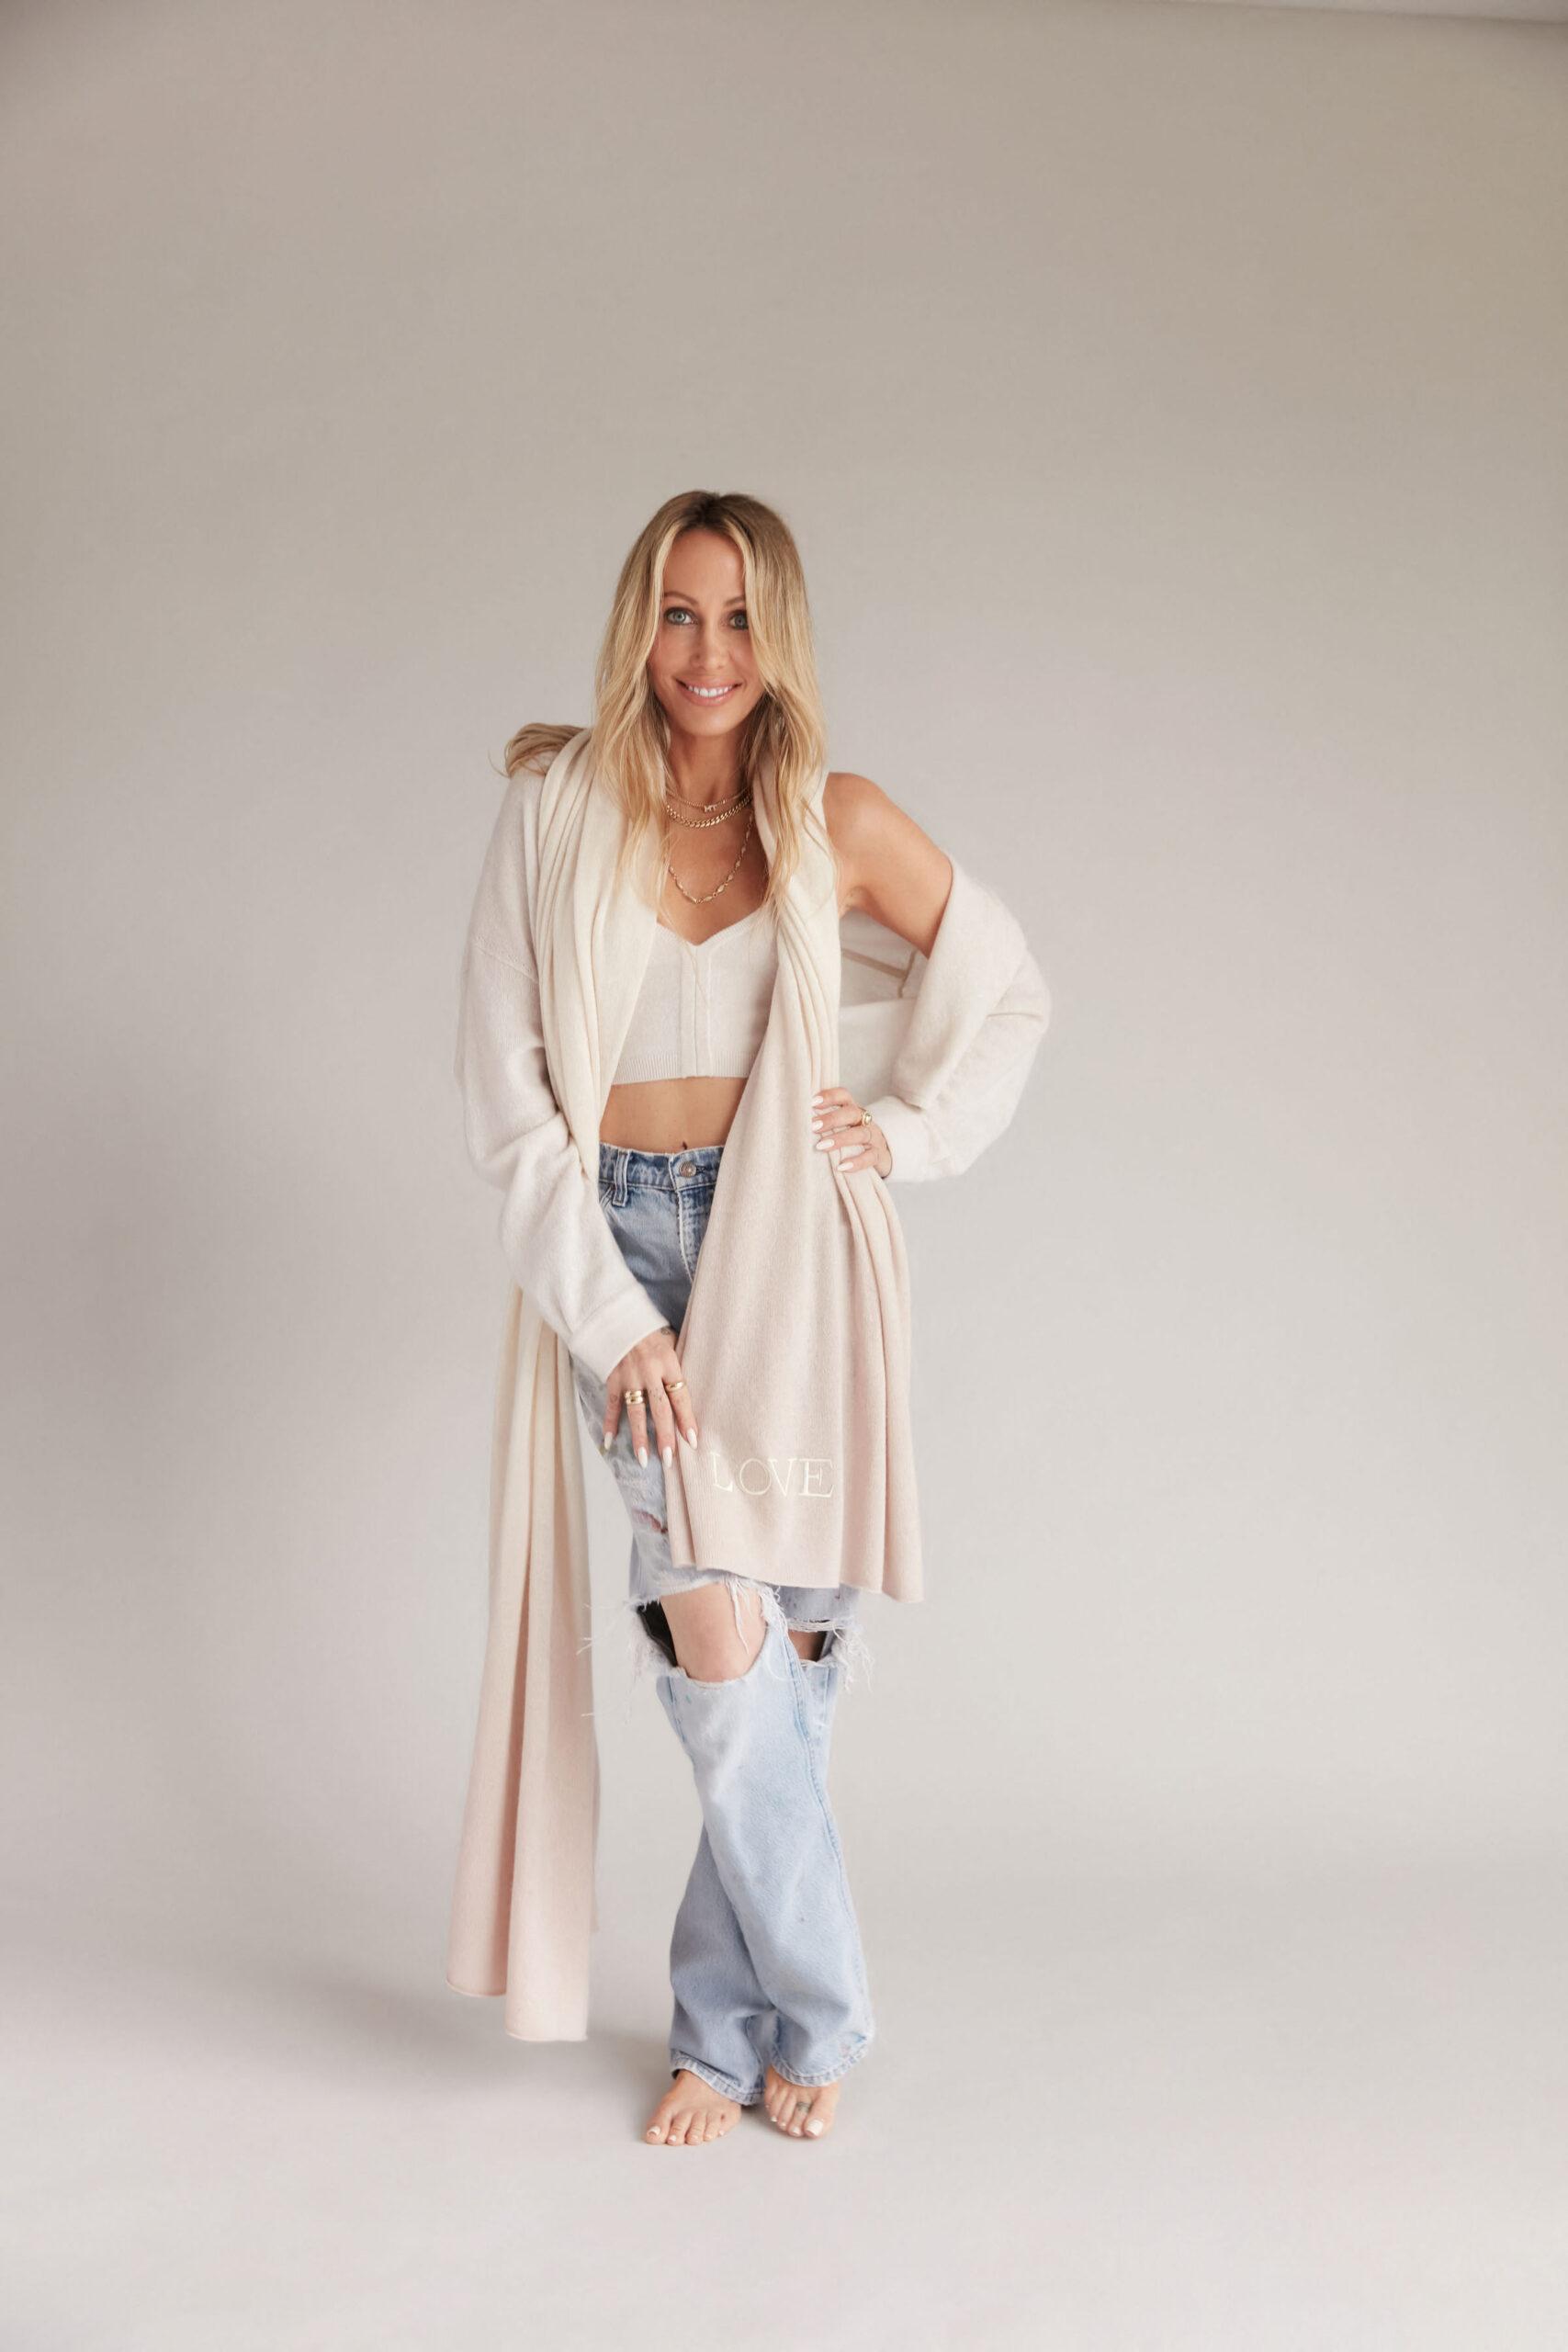 Tish Cyrus pose with family for NAKEDCASHMERE LOVE 2022 campaign